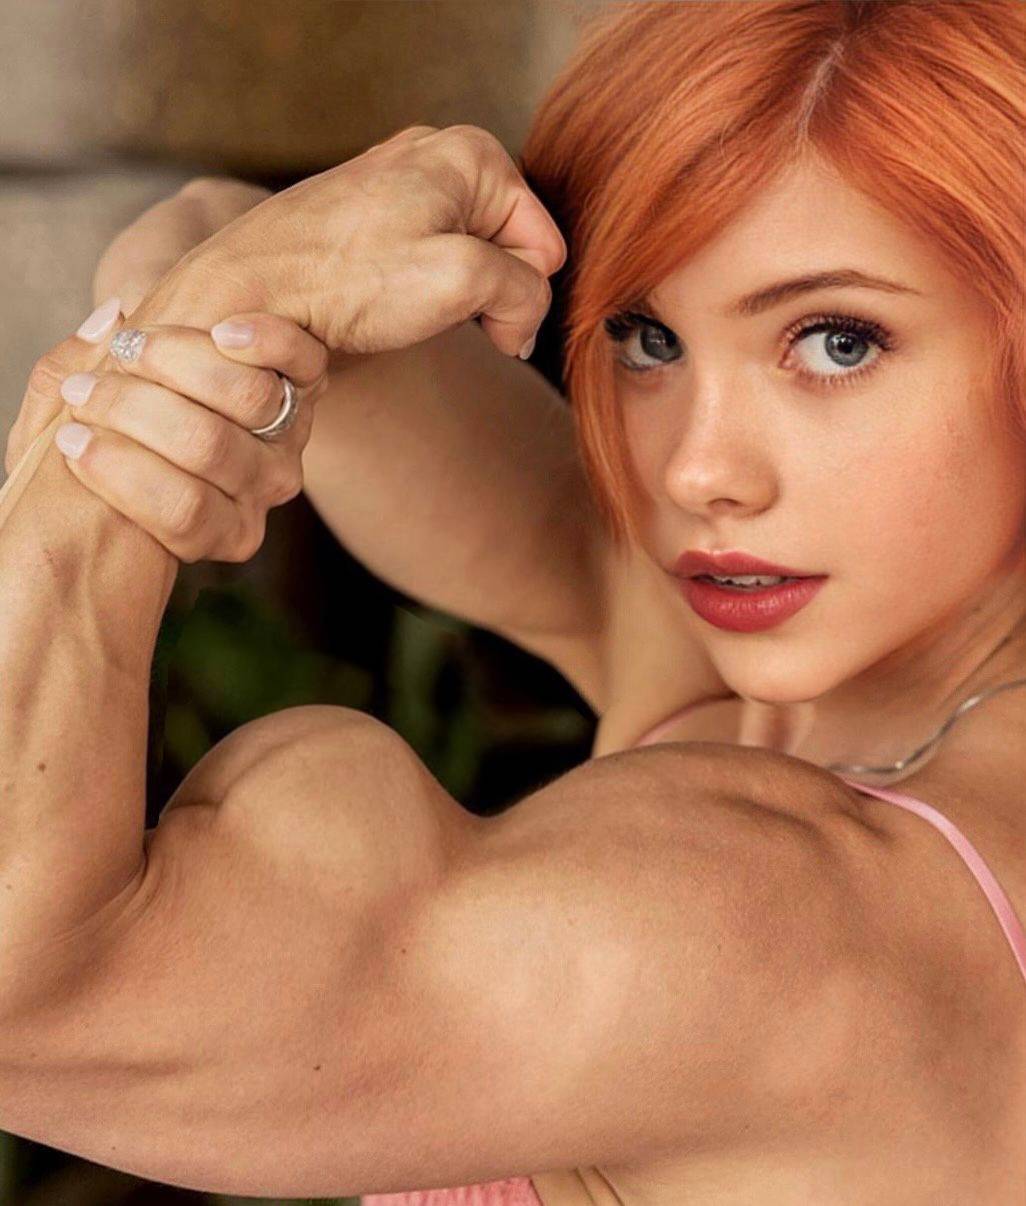 Muscle girl eye candy by Turbo99 on DeviantArt